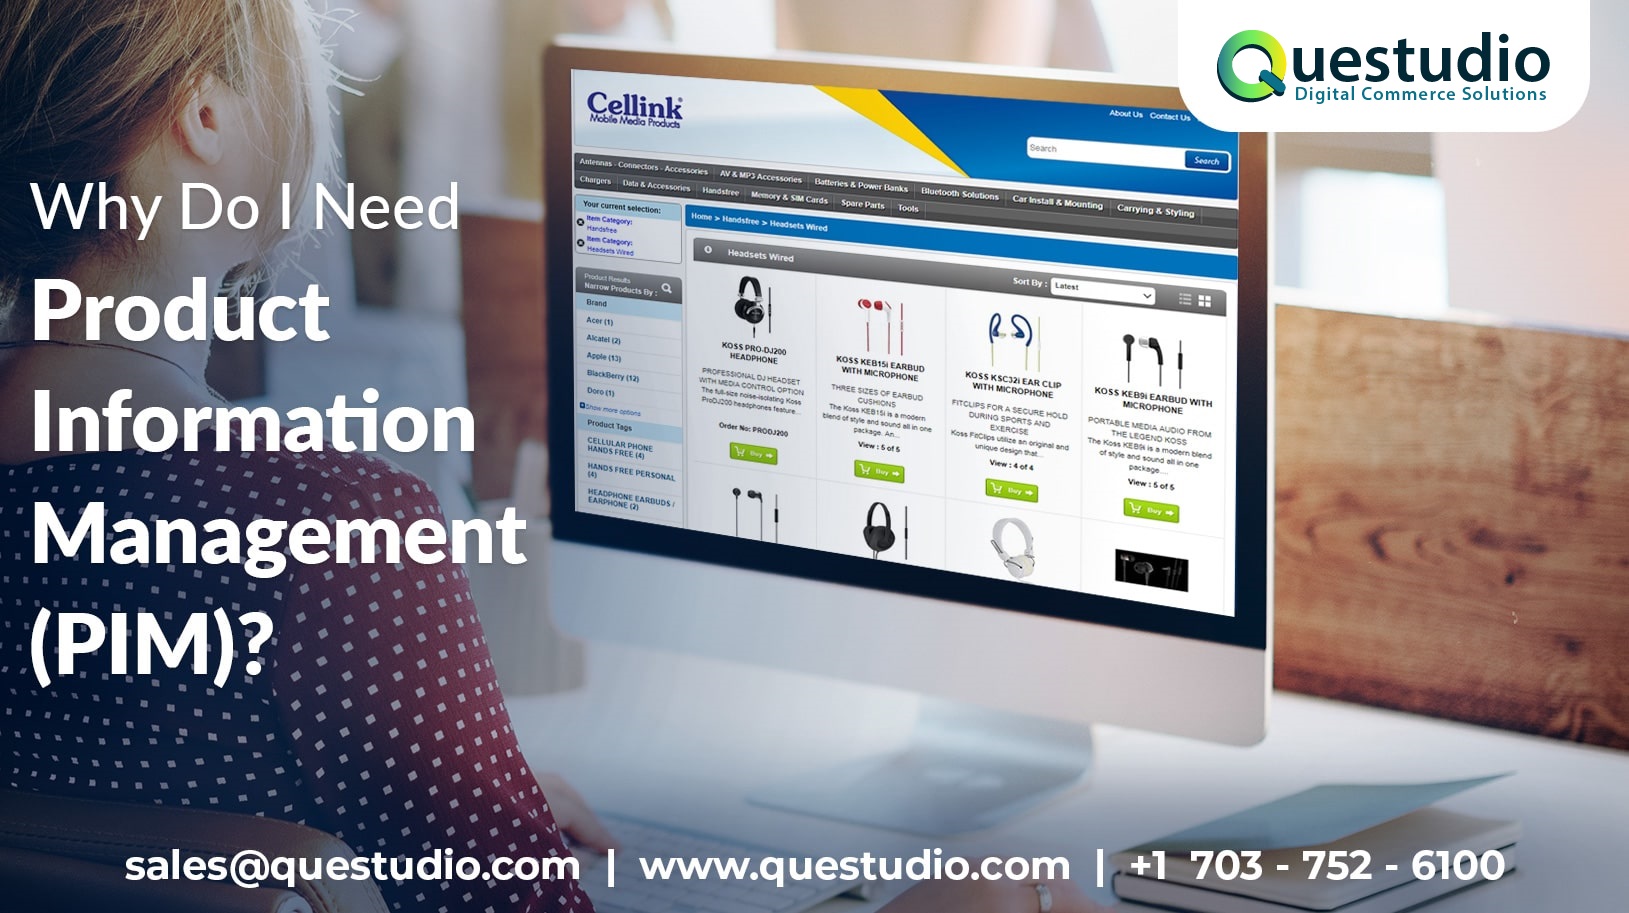 Why-Do-I-Need-Product-Information-Management-questudio